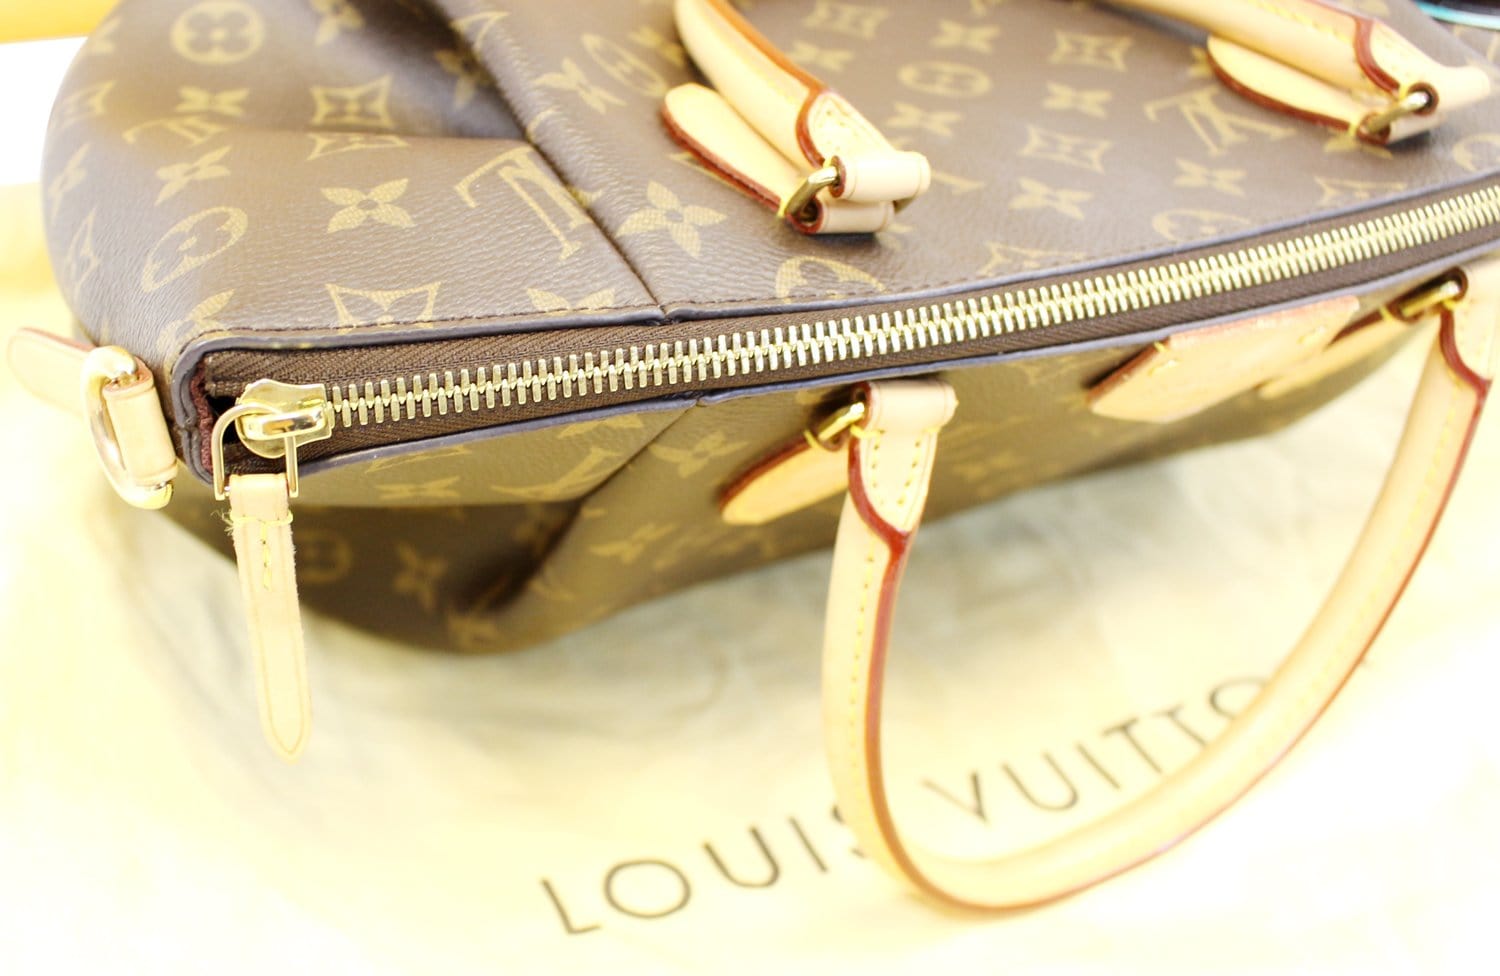 two toned louis from the GATE🤎🖤 #louisvuitton #louisvittonbag